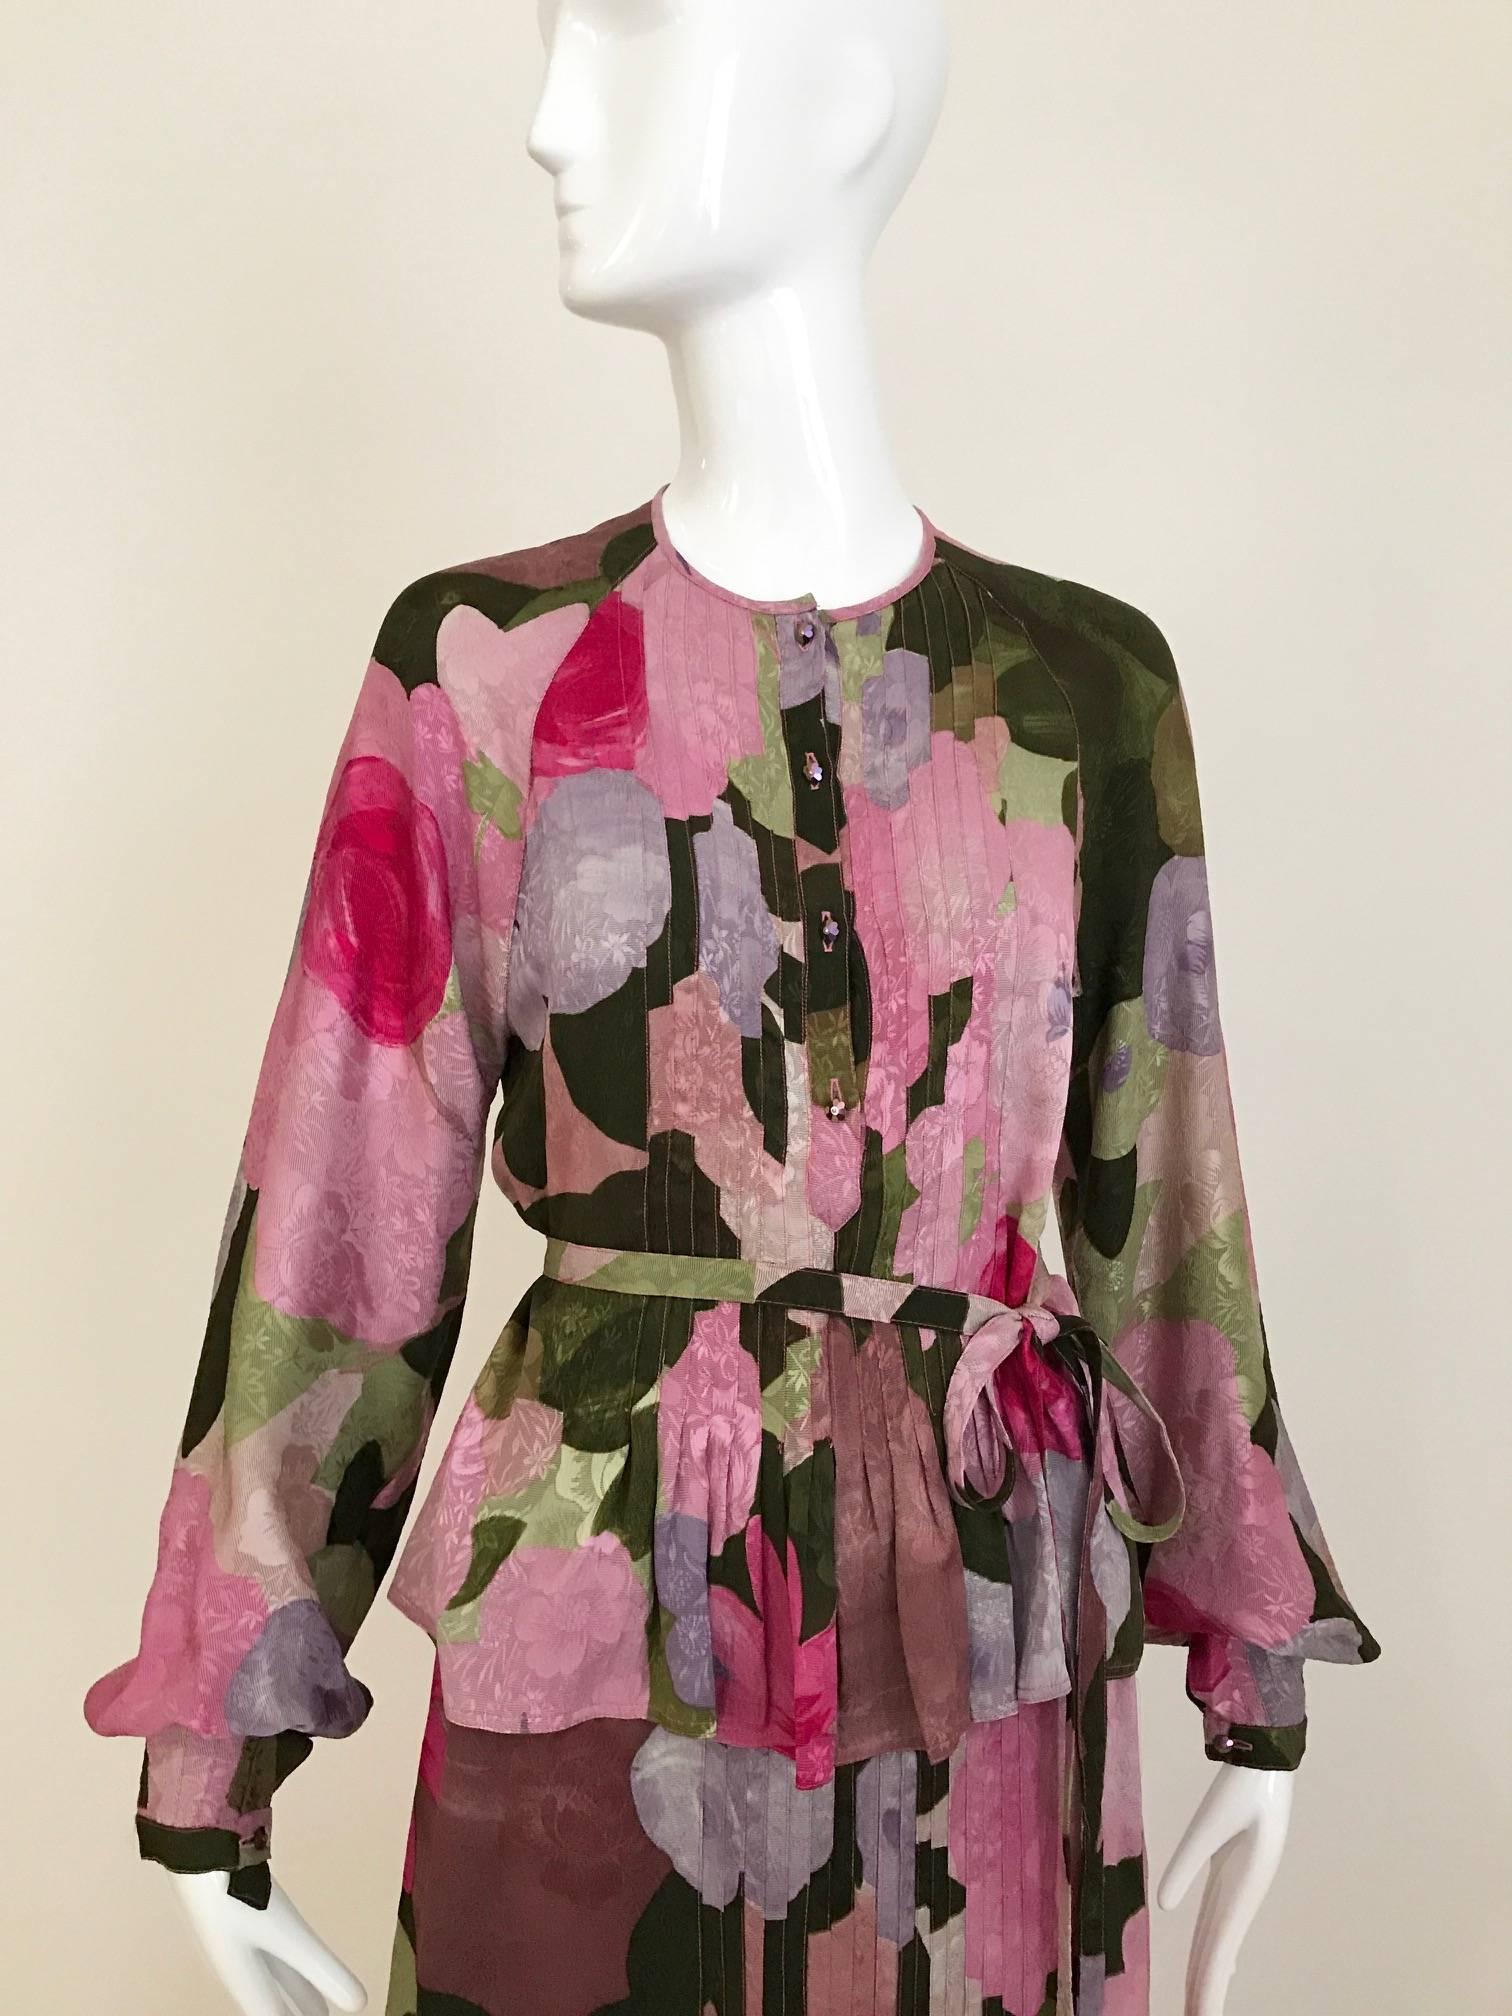 This 1970s Geoffrey Beene floral print mixes pink, fuchsia, lavender, grey and black on beautiful silk jacquard fabric.  The bohemian, 2pcs, blouse & skirt set has pintuck stitching running vertically down the front on the blouse and skirt. And the